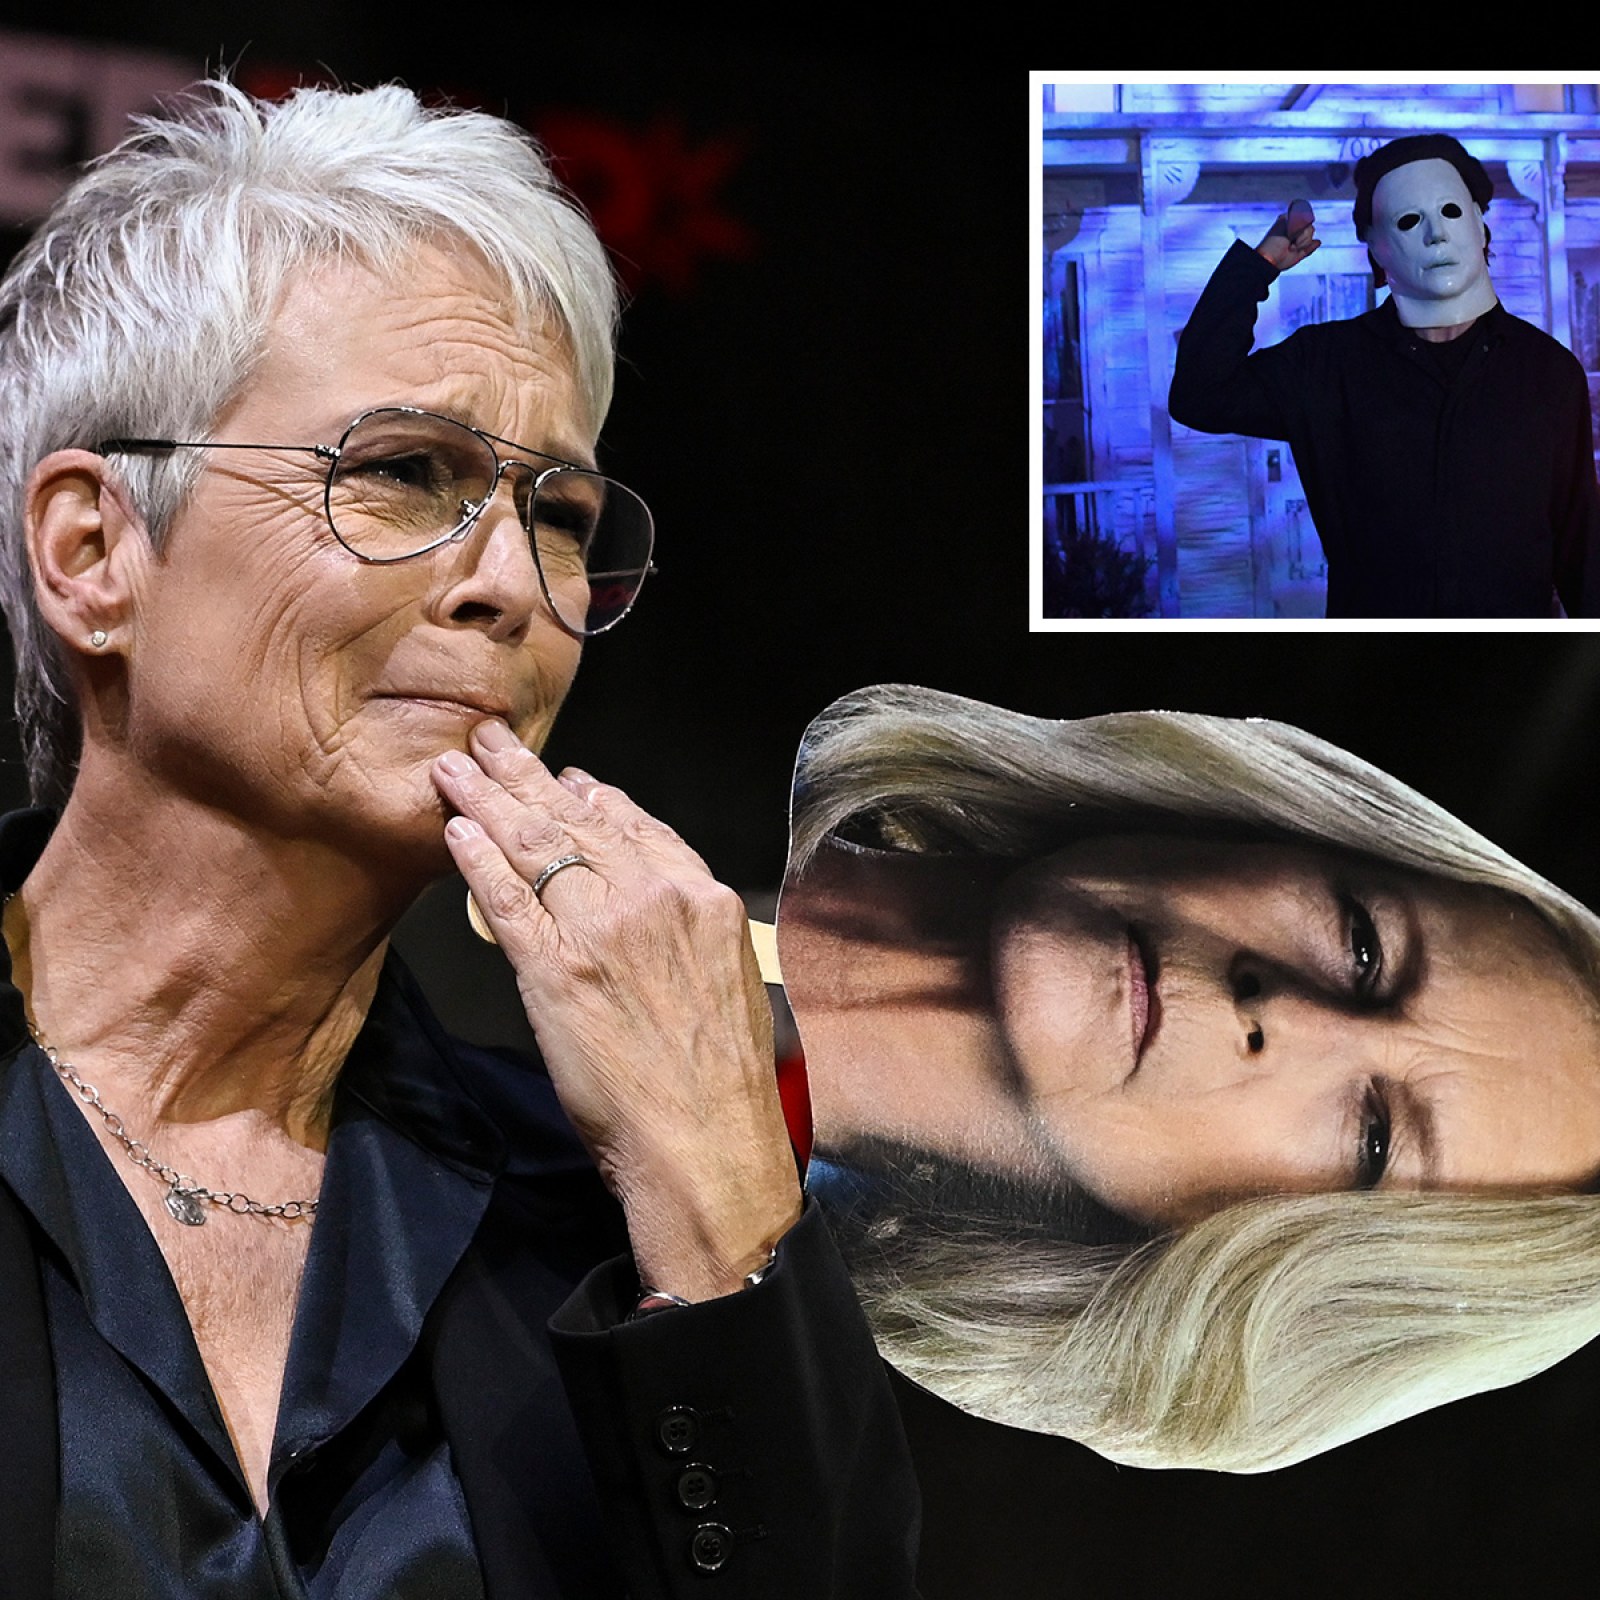 Jamie Lee Curtis in Tears as She Bids Farewell to Her 'Halloween' 'Legacy'